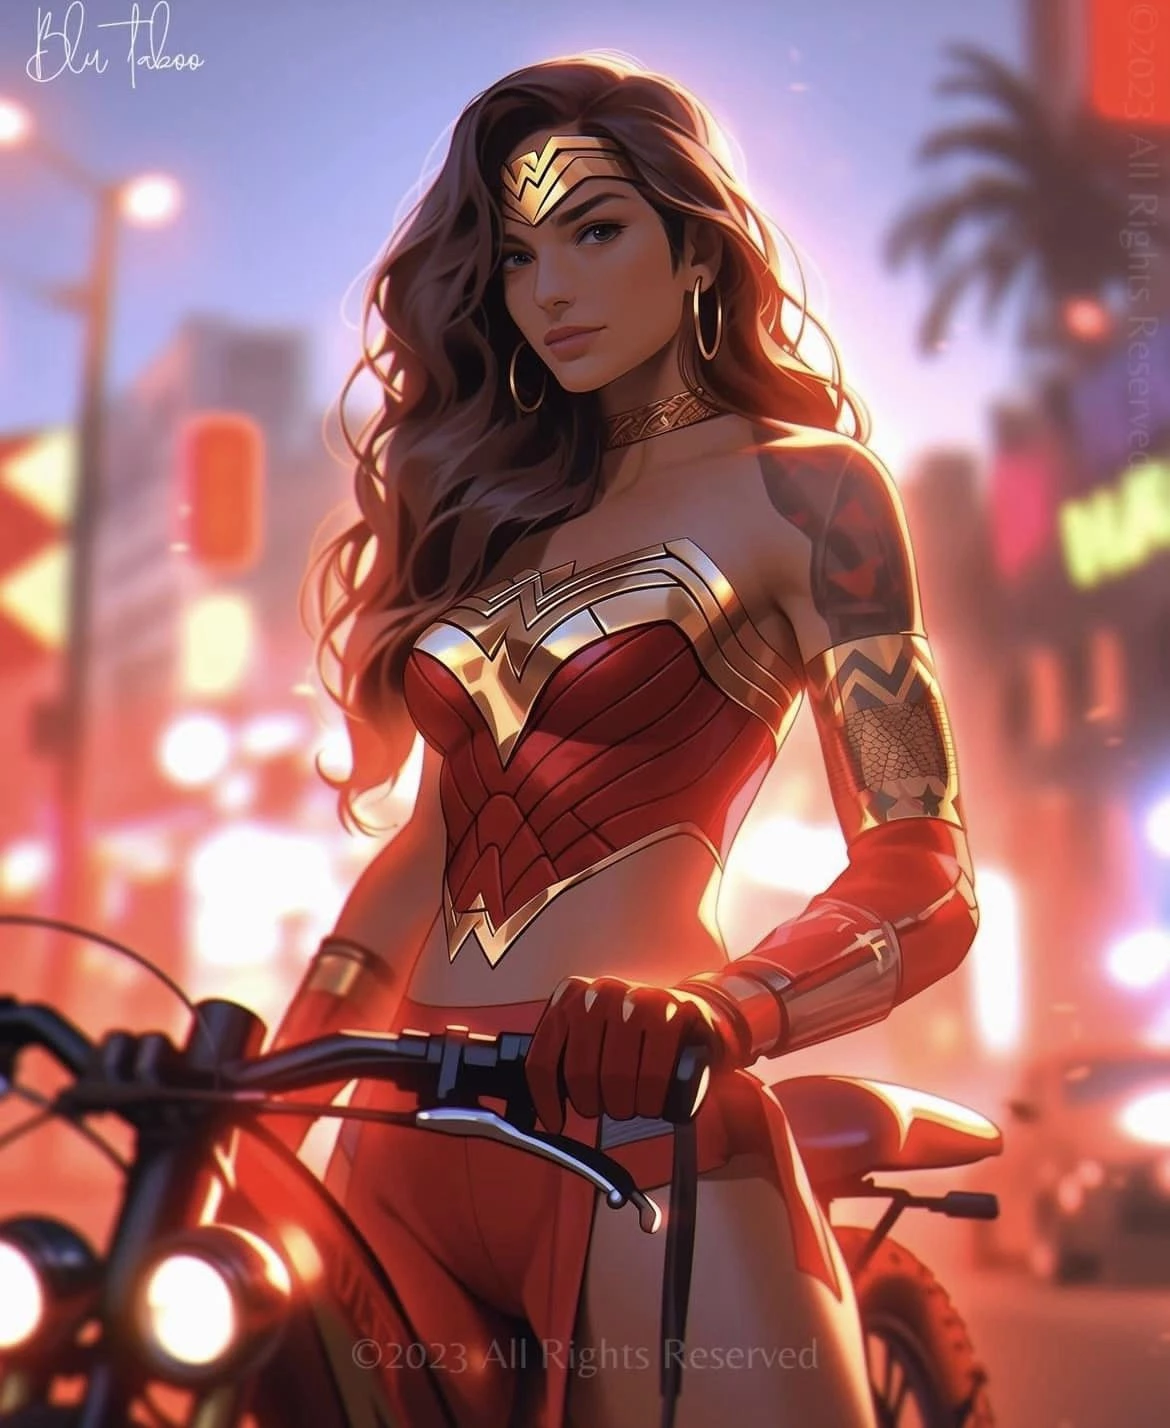 Meanwhile, Wonder Woman Decided To Blend In And Finds Herself A Nice Ride